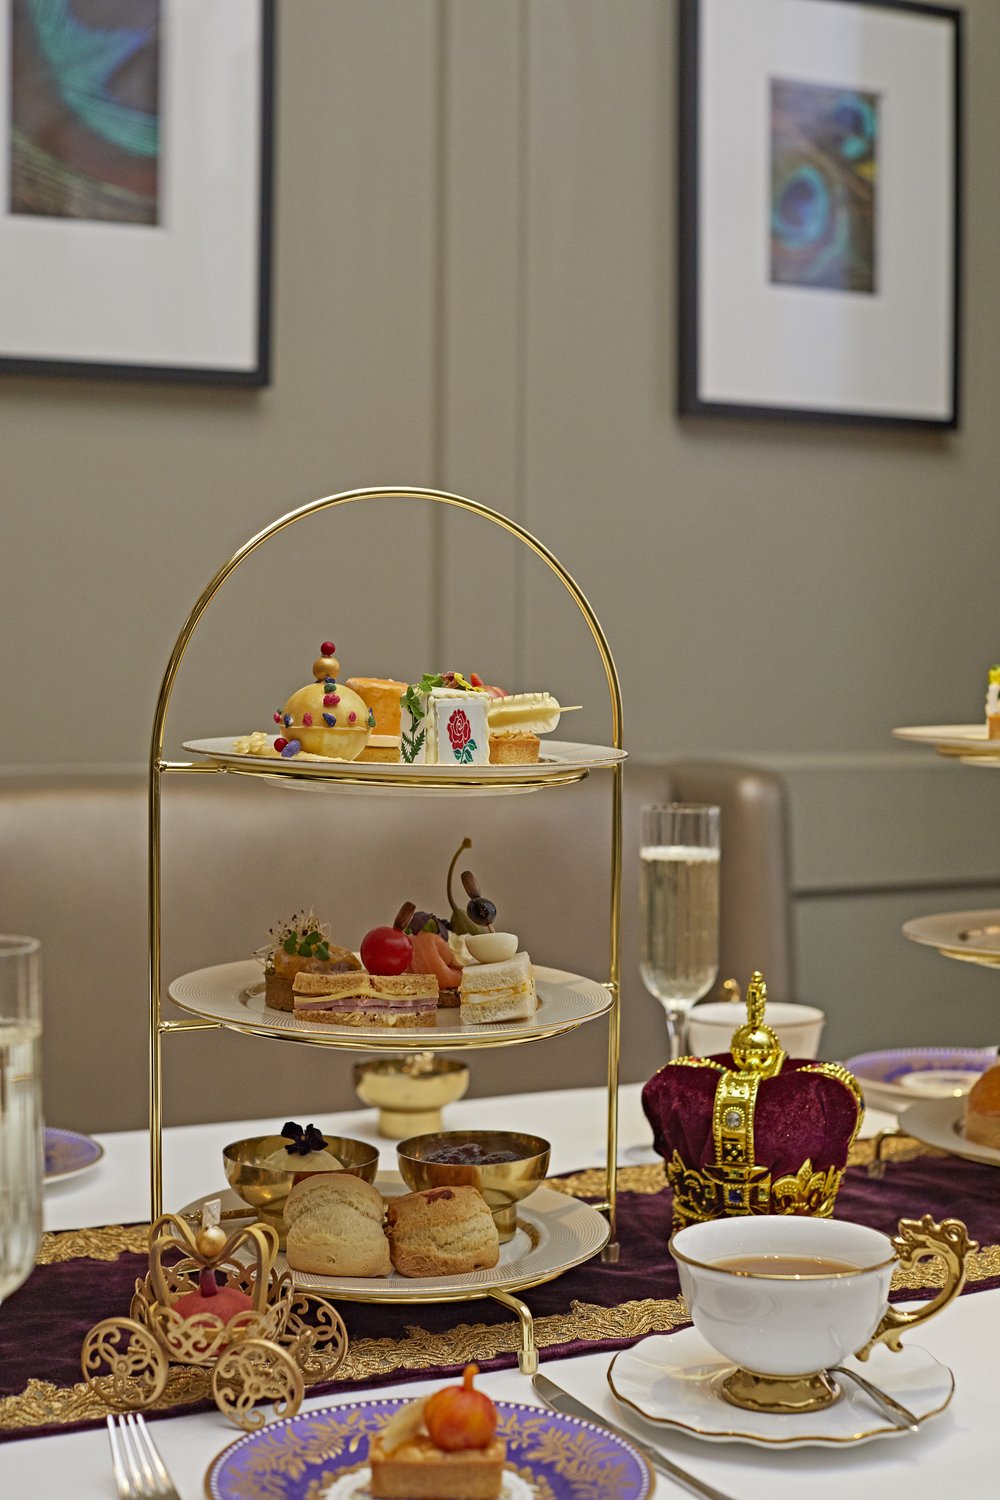 New in London: Mariage Frères Elegant Tea Room and Museum is Now